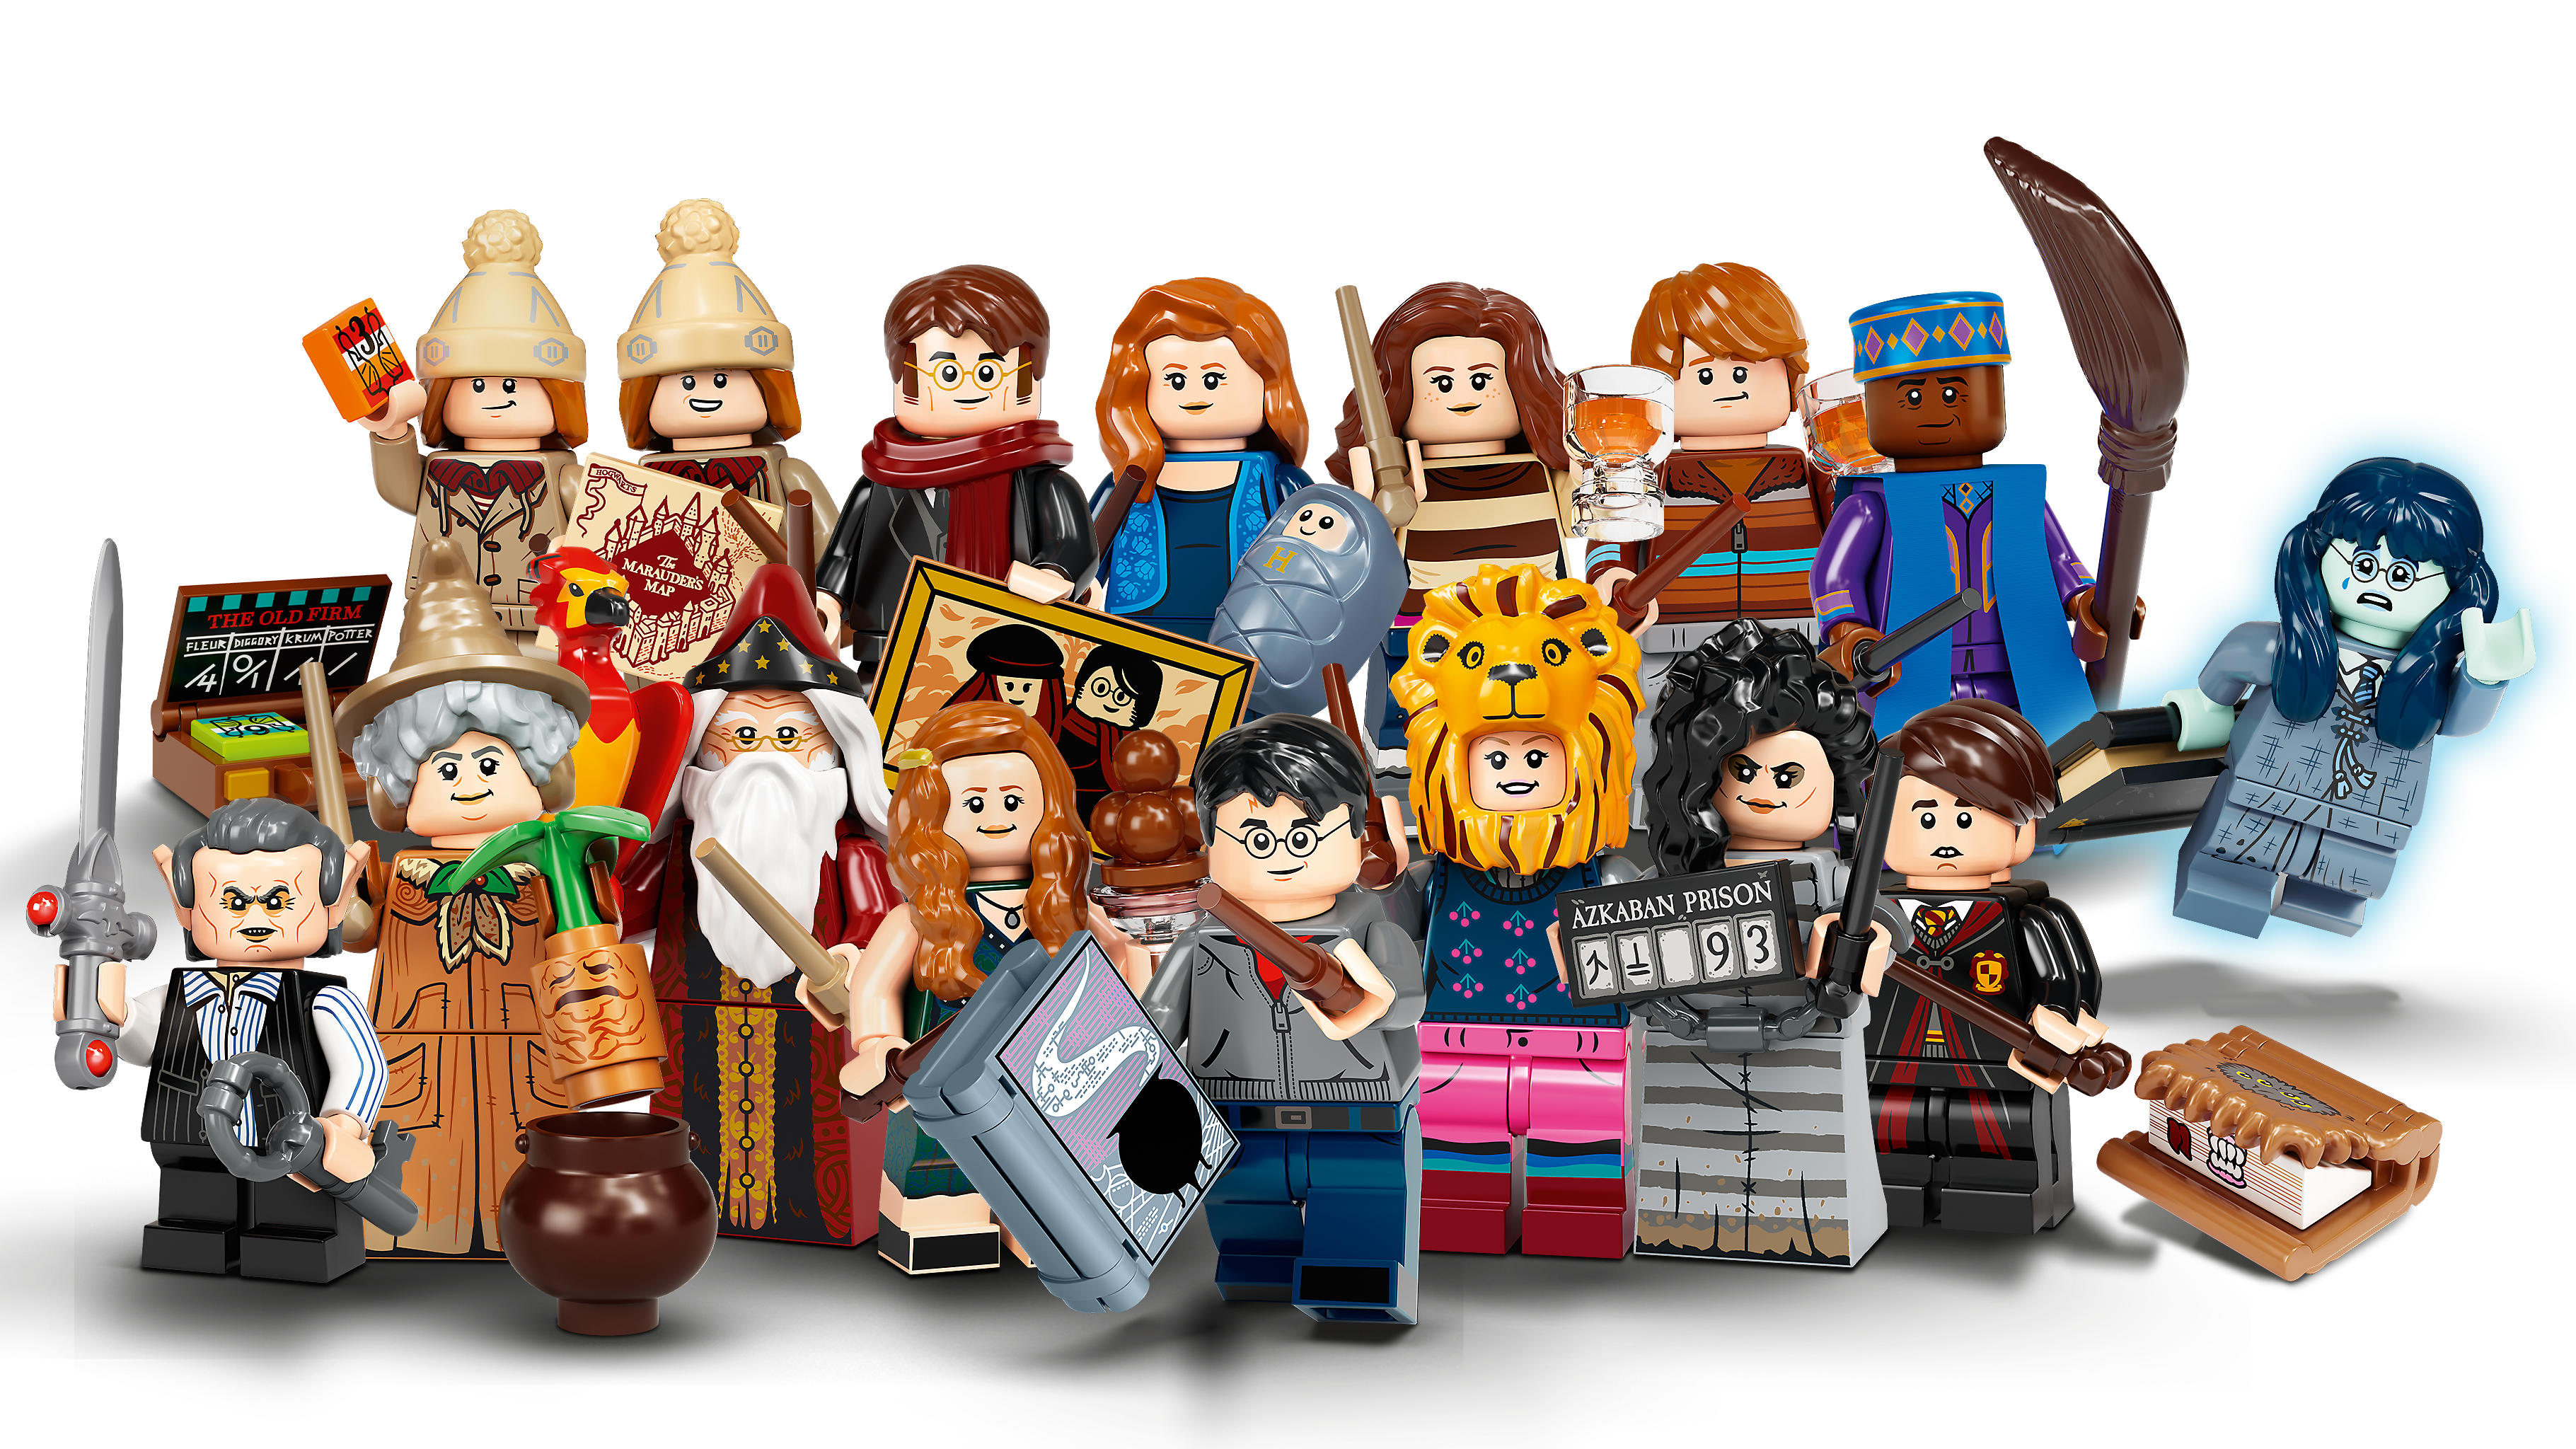 Harry Potter™ Series 2 71028 | Harry Potter™ | Buy online at the Official LEGO® Shop